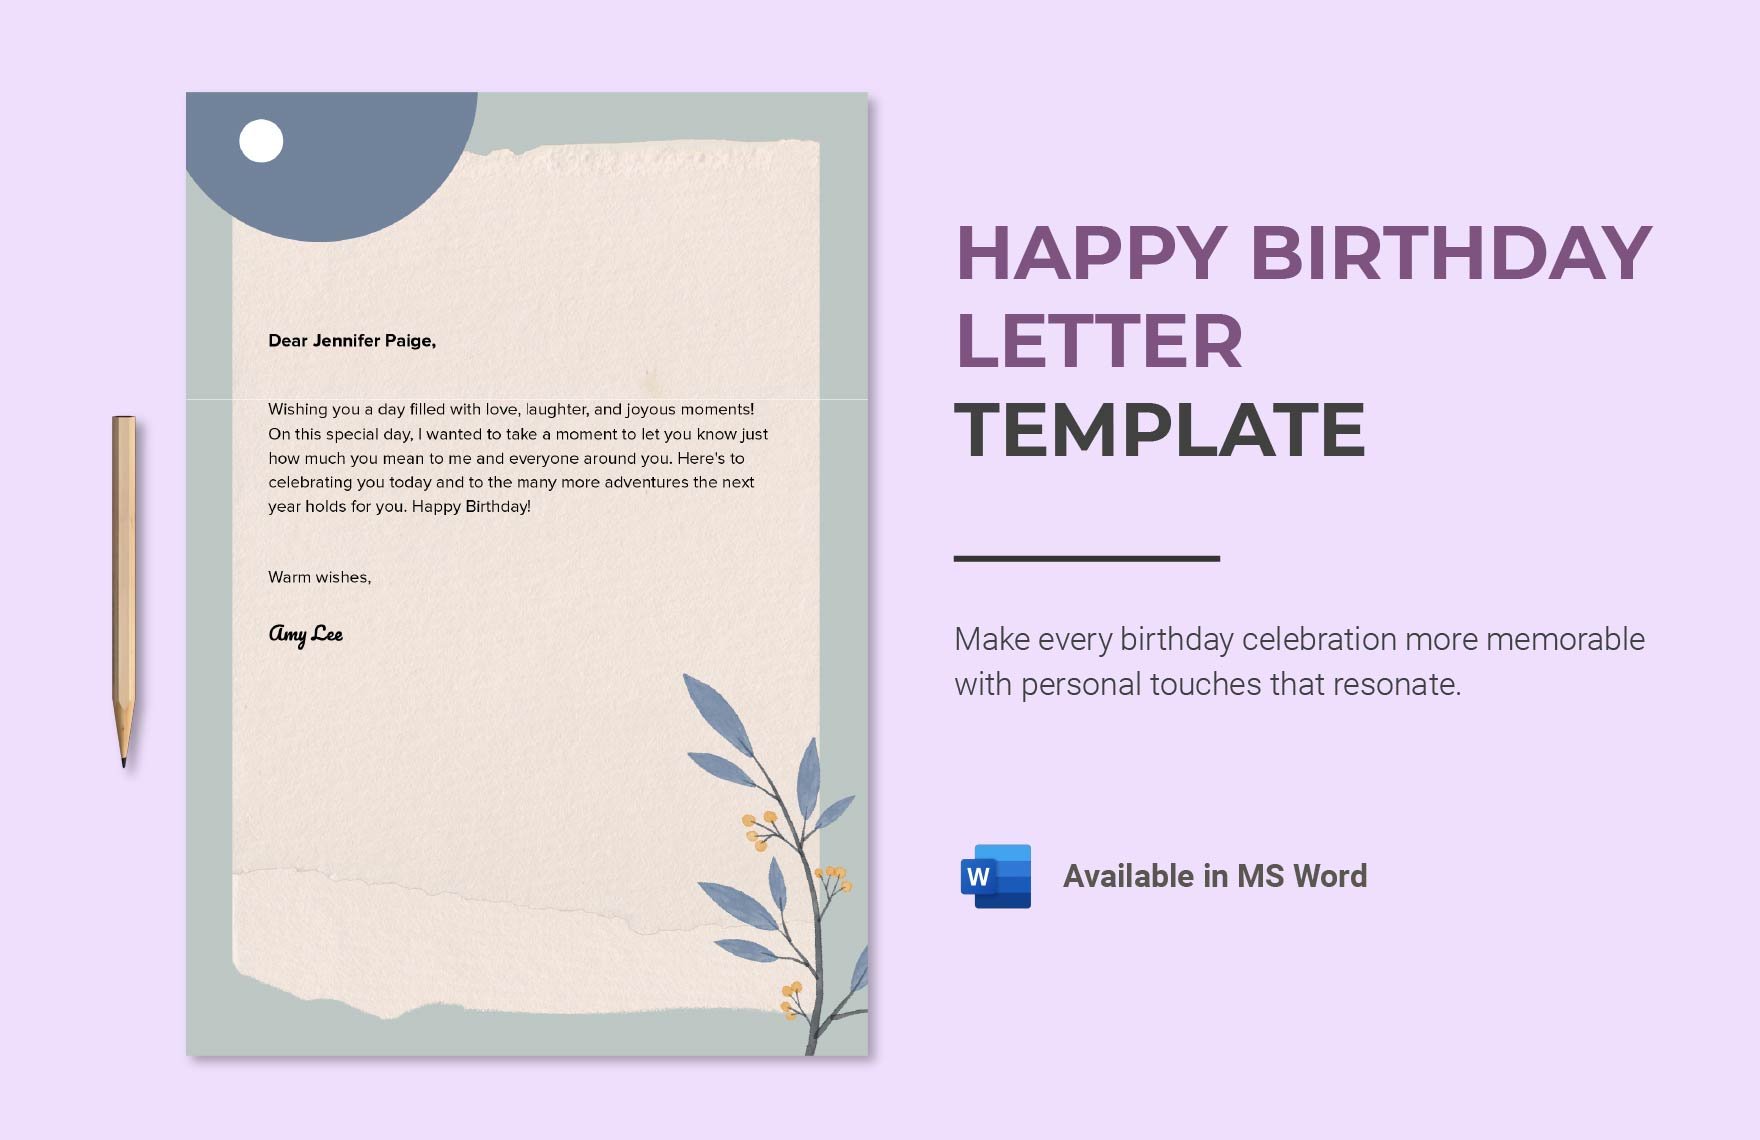 Happy Birthday Letter Template in Word - Download | Template.net